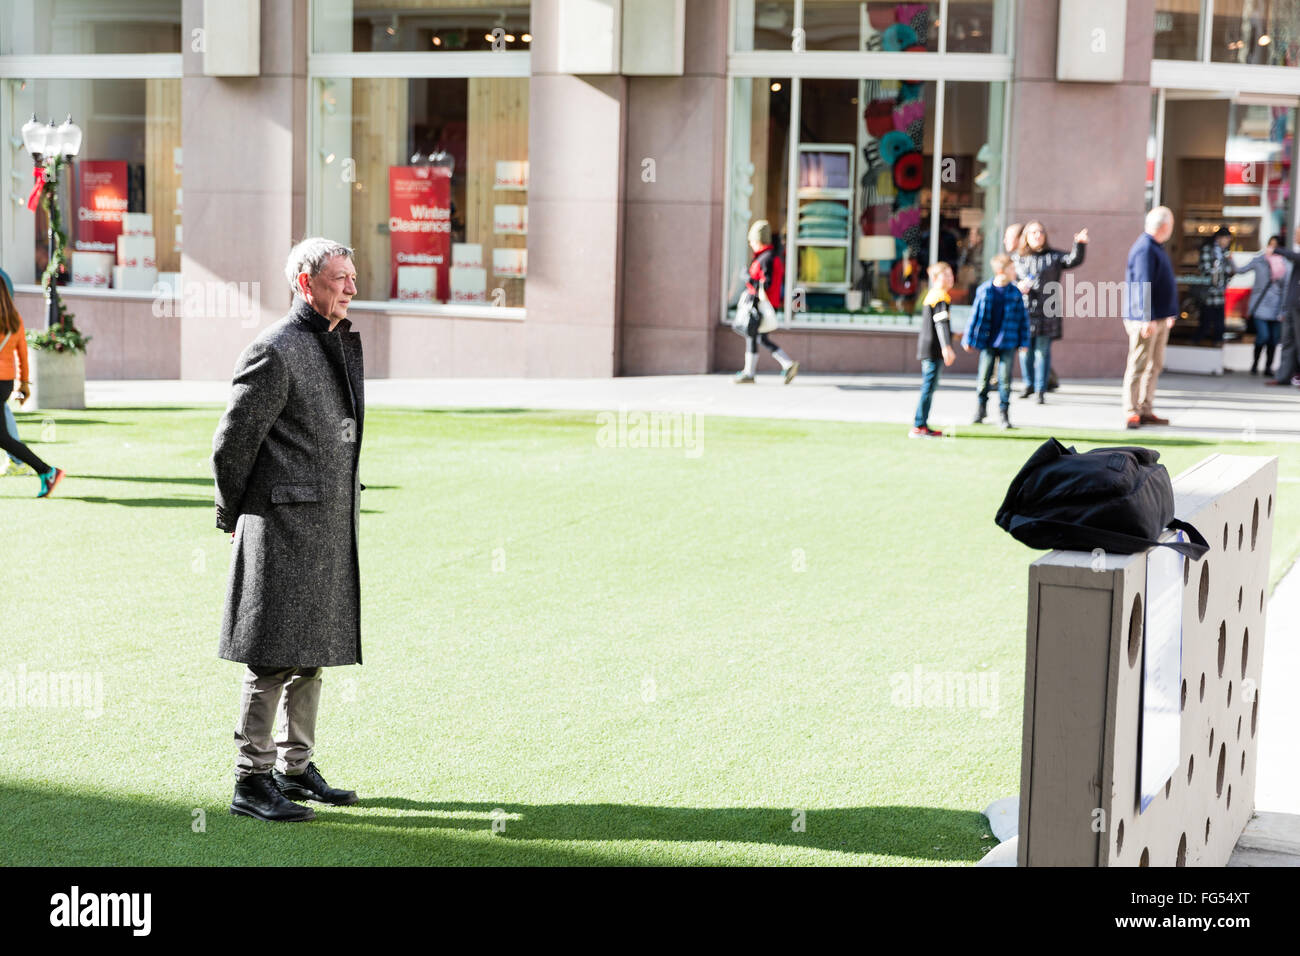 A man standing on a middle of the grass patch, warming up, Winter Walk SF, converted into a pedestrian plaza for the holidays Stock Photo